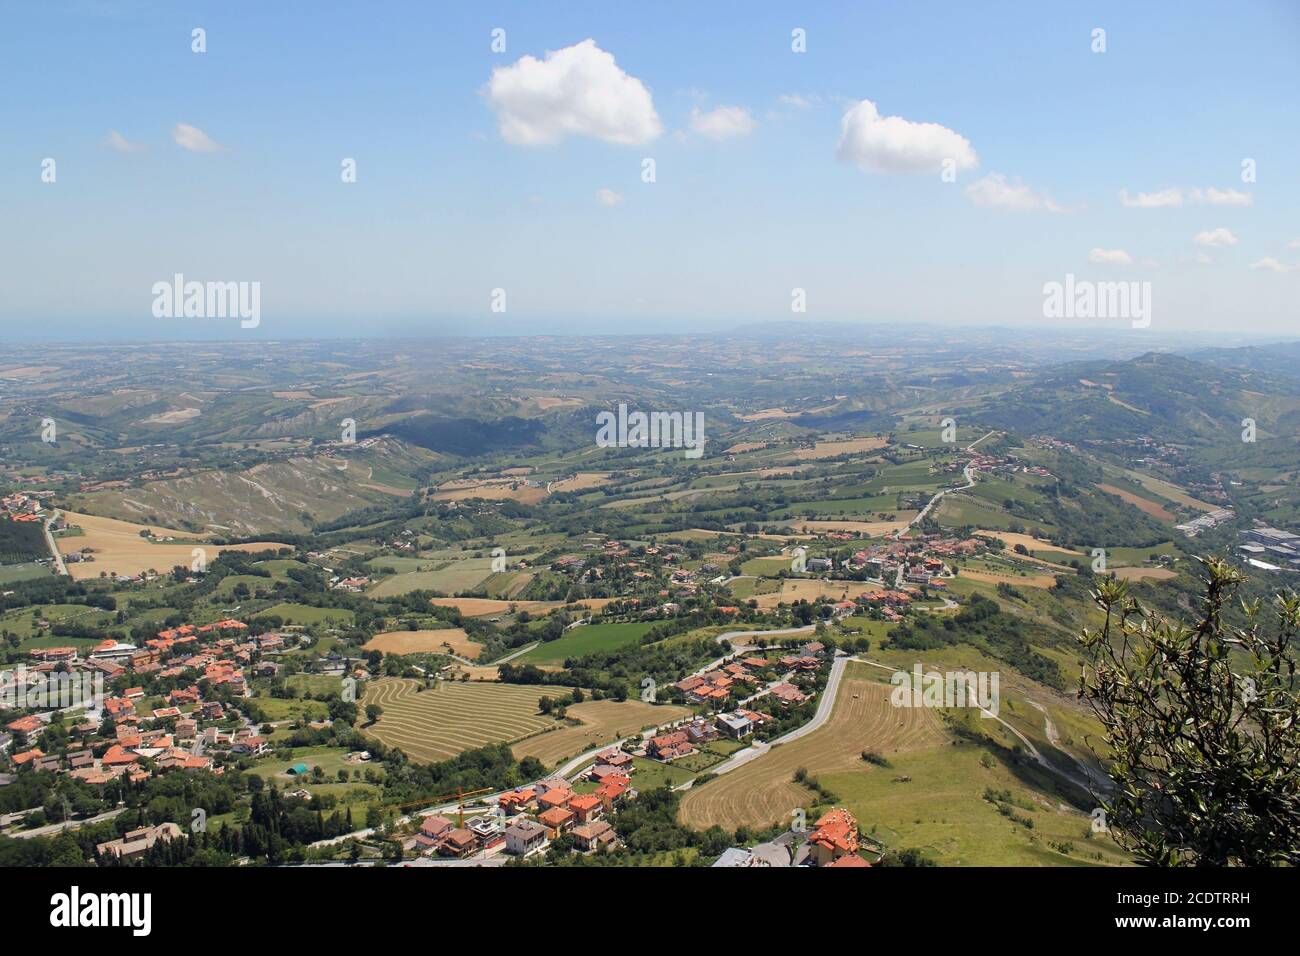 Typical sunny summer landscape of rural northern Italy from height of bird's flight. Stock Photo